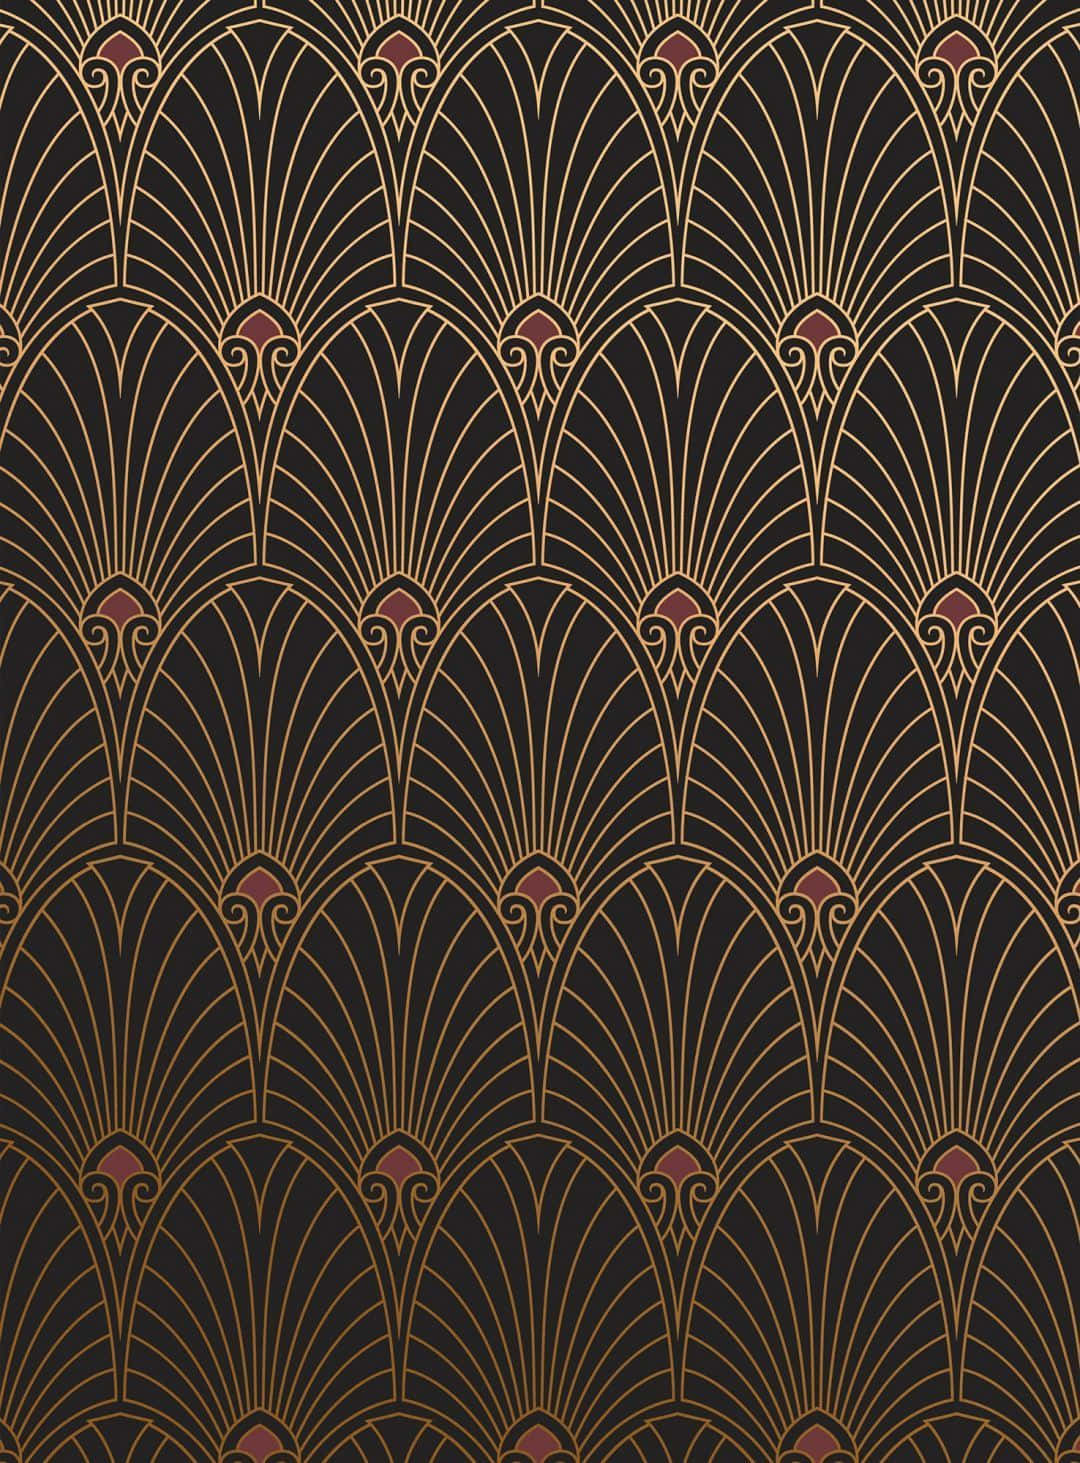 Art Deco Wallpaper With Gold And Black Designs Wallpaper